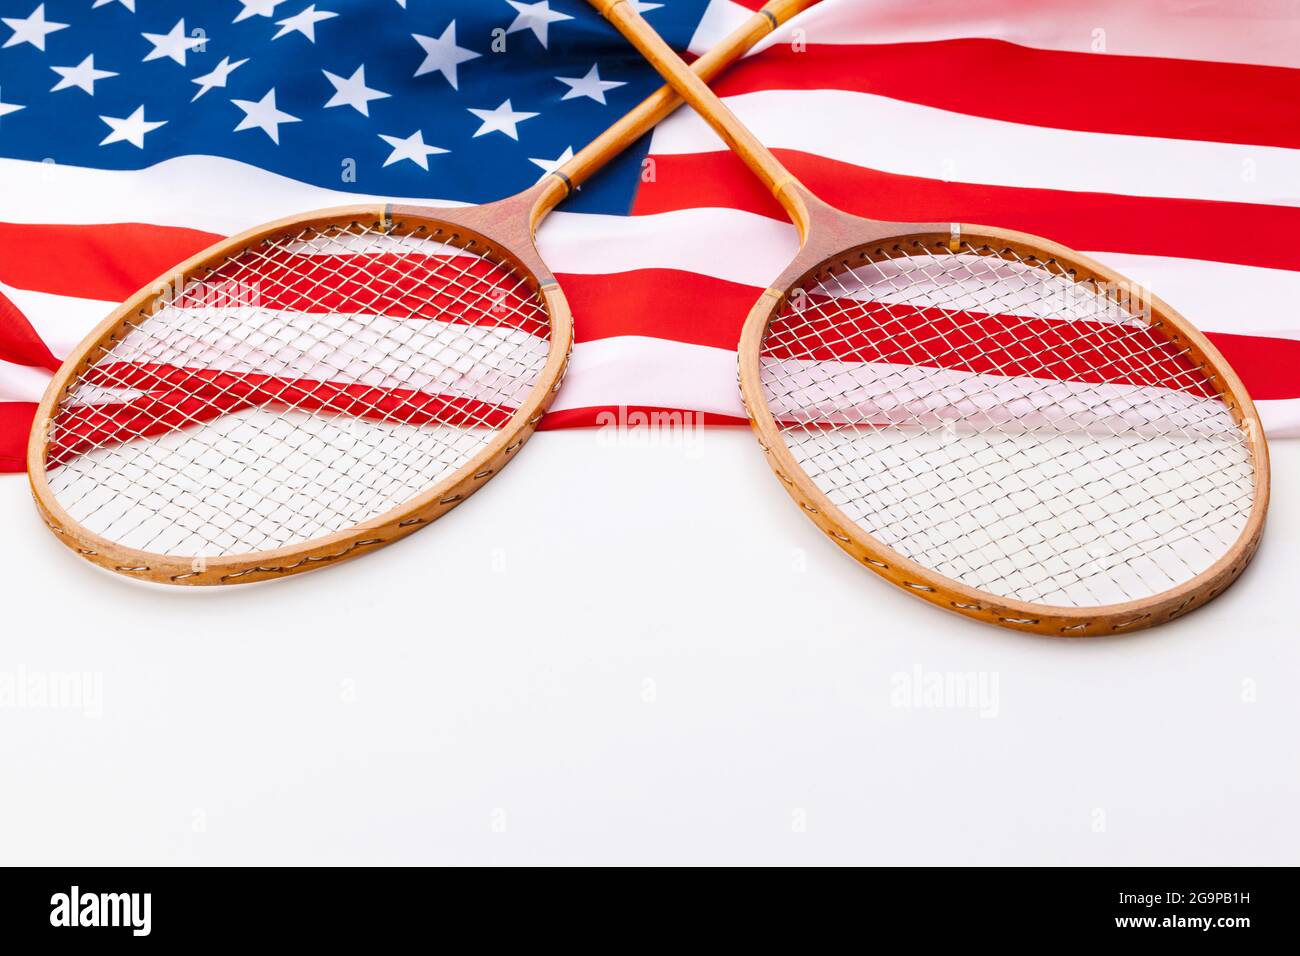 American flag with tennis rackets. Stock Photo